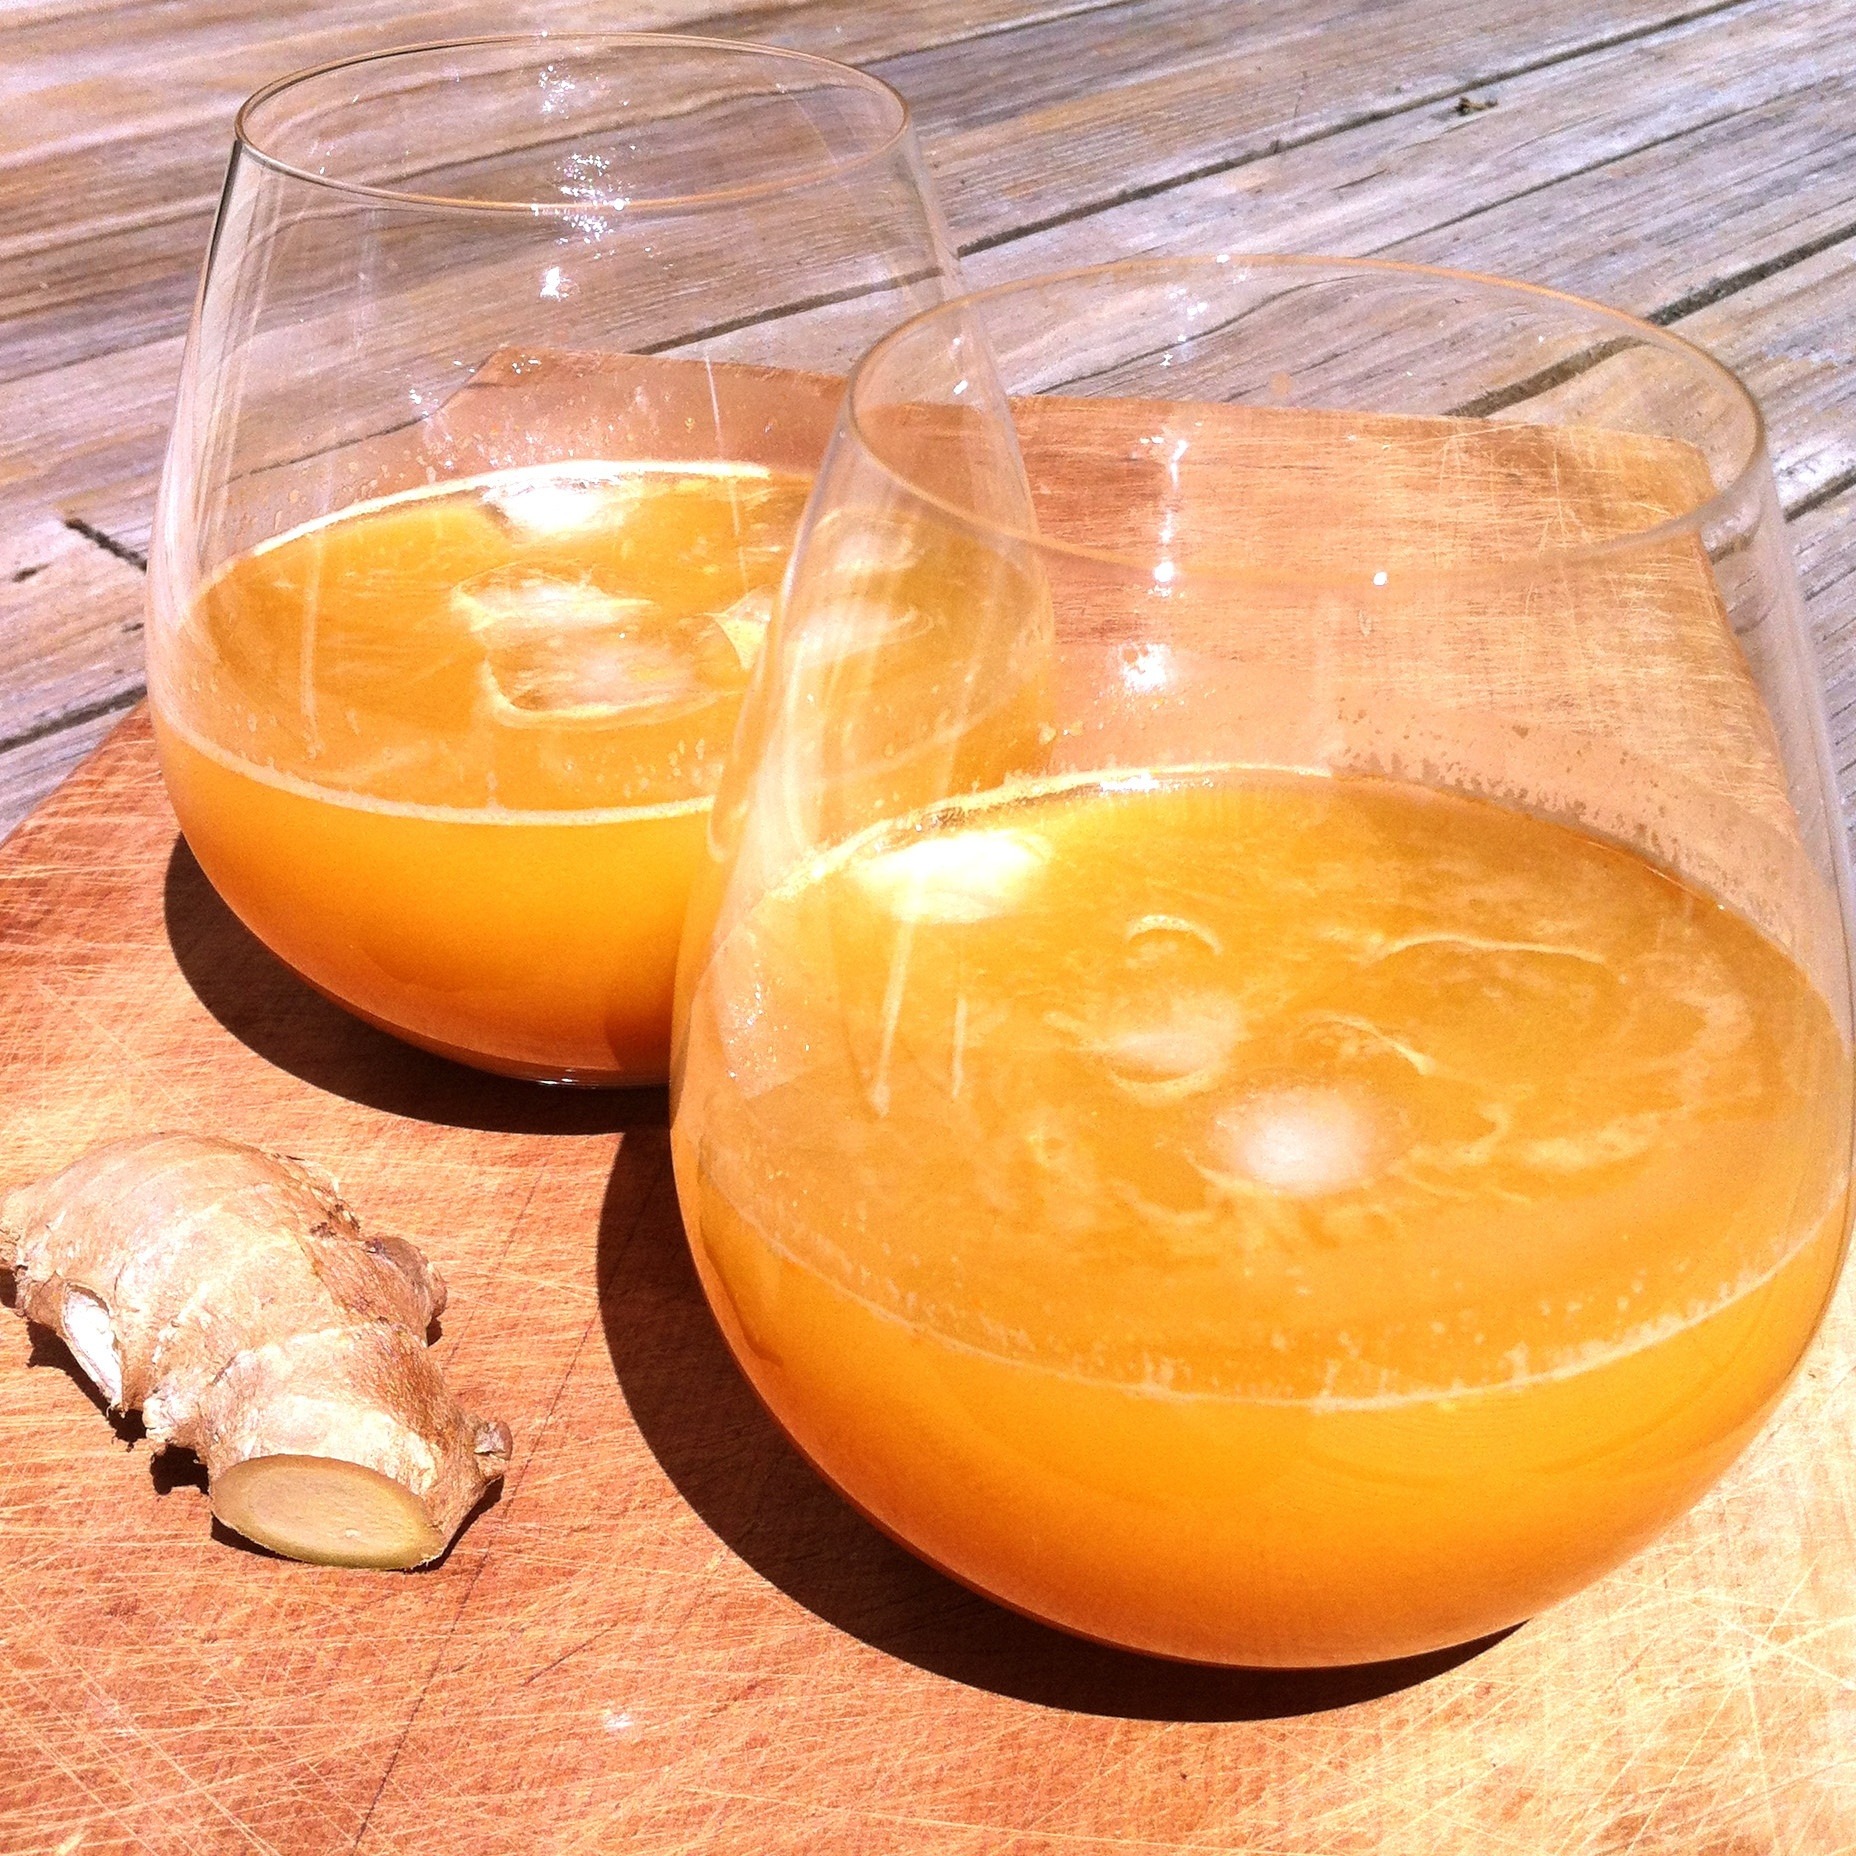 An excellent immune-system-boost when the flu bugs are out and about. Made with oranges, carrots, and gubinge.Be Good Organics